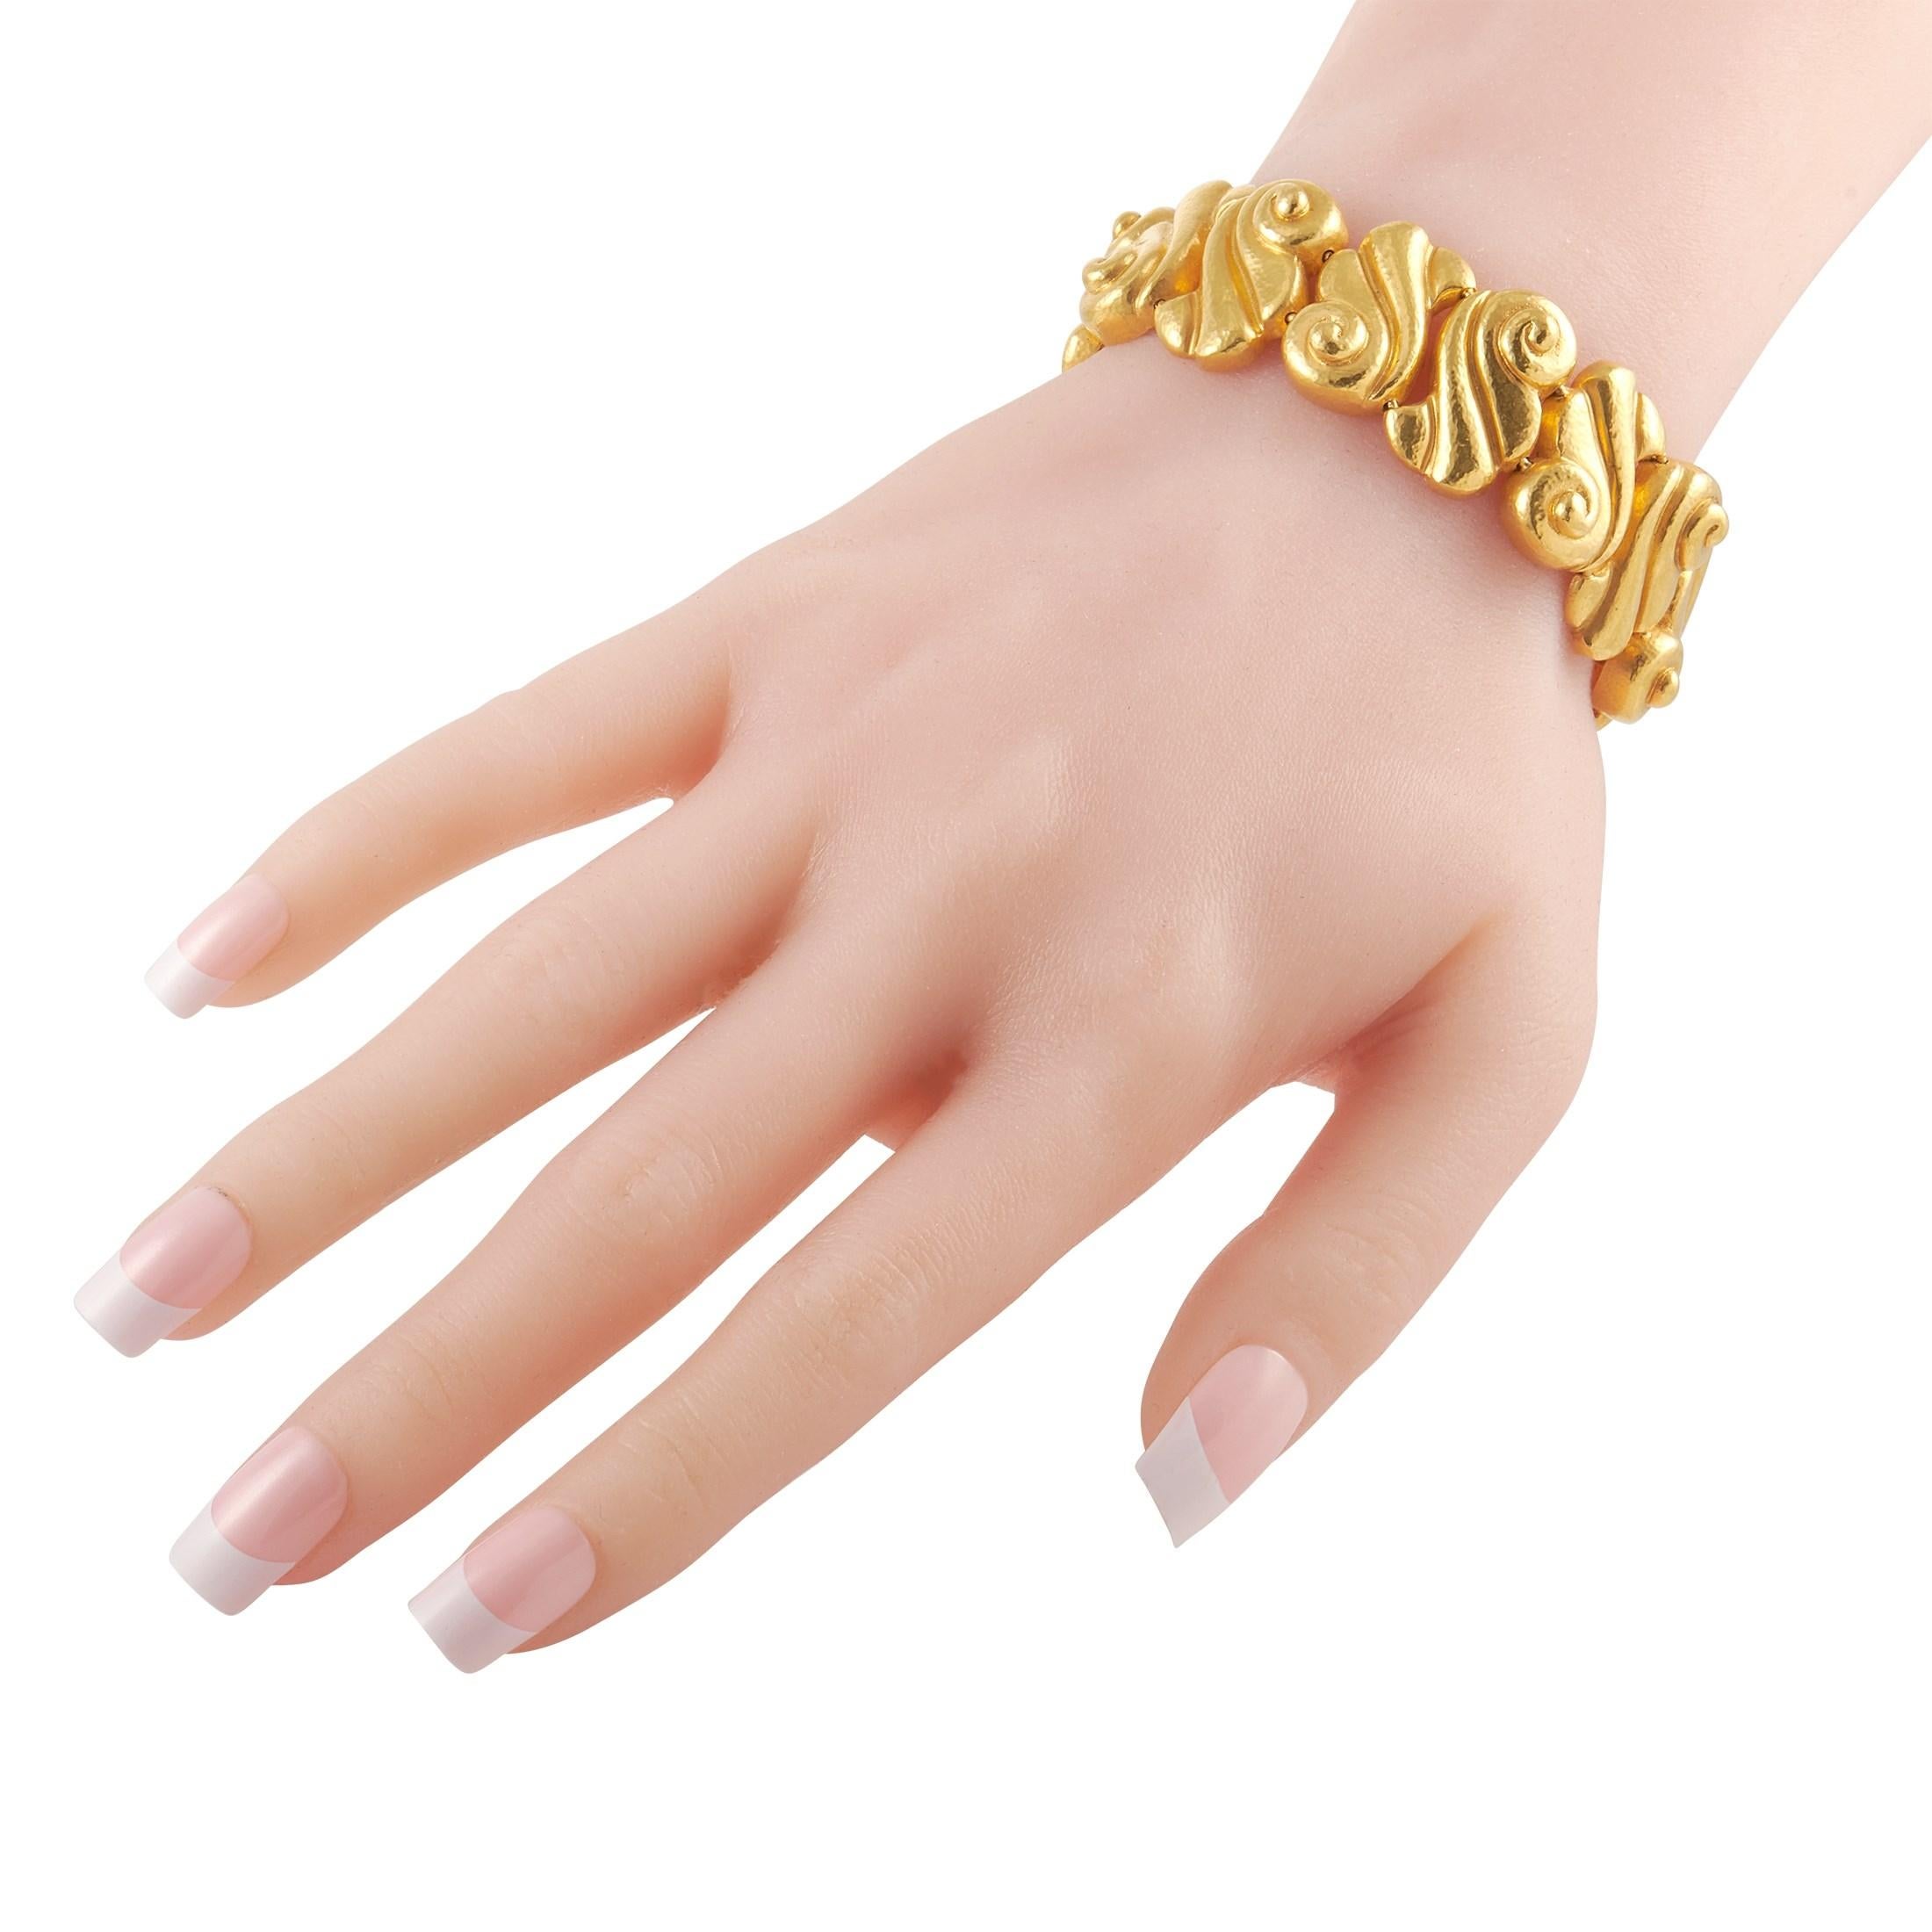 This captivating bracelet from Zolotas recalls the beauty and refinement of a bygone era. Crafted from 22K Yellow Gold links with a sculptural sense of style, this 7” long bracelet is a statement-making piece that commands attention in the best way